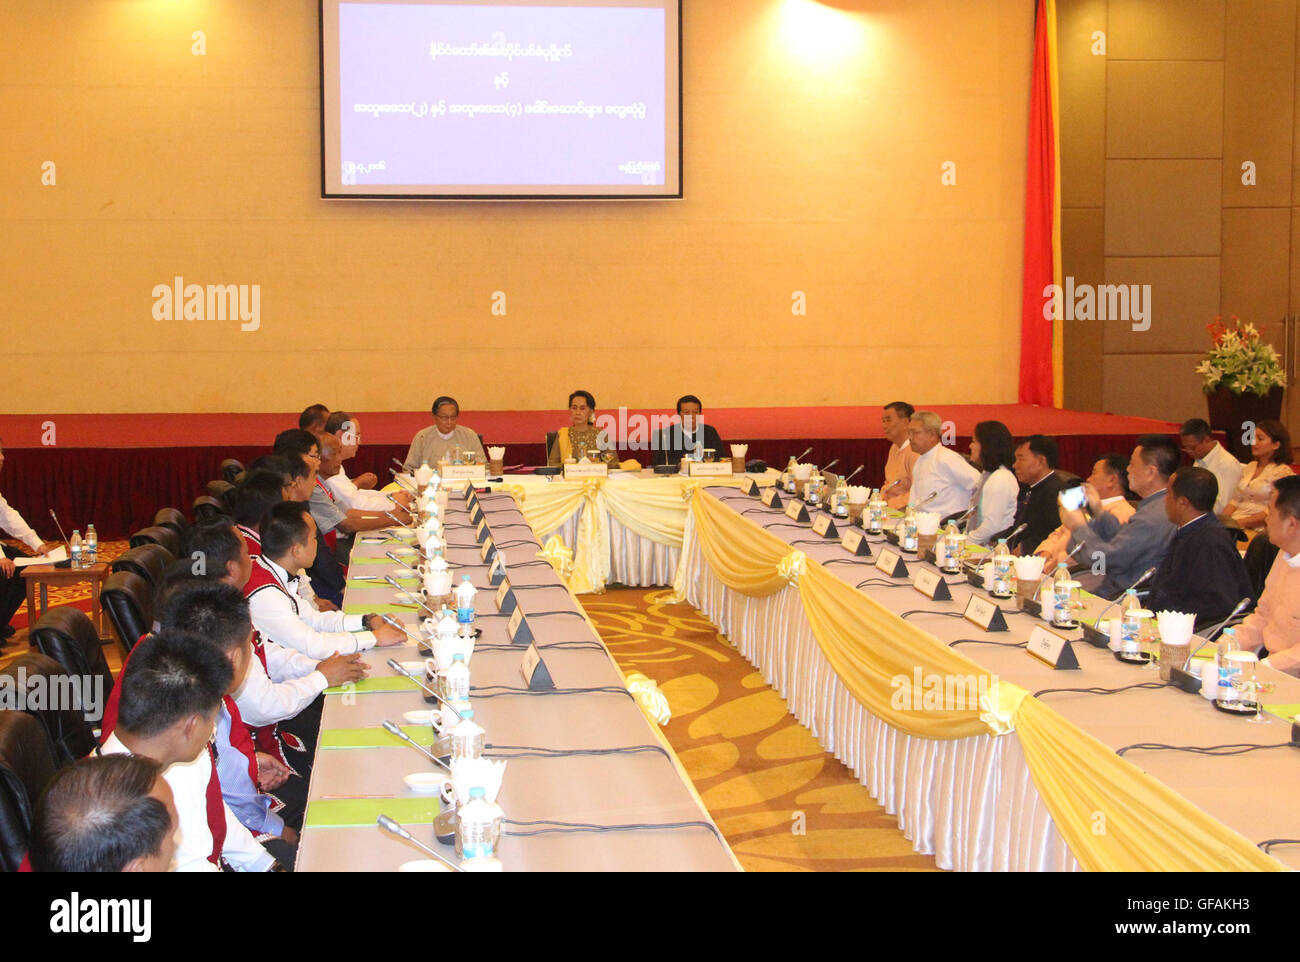 Nay Pyi Taw, Myanmar. 29th July, 2016. Myanmar State Counselor Aung San Suu Kyi (C, rear) meets with leaders of the United Wa State Army (UWSA) and the National Democratic Alliance Army-Eastern Shan State (NDAA-ESS)(Mongla) in Nay Pyi Taw, Myanmar, July 29, 2016. The Wa and Mongla delegations said on Friday that they welcome the 21st Century Panglong Ethnic Conference although the detailed discussions of participation are underway, said U Zaw Htay, spokesperson for the President's Office. © Soe Than Lynn/Xinhua/Alamy Live News Stock Photo